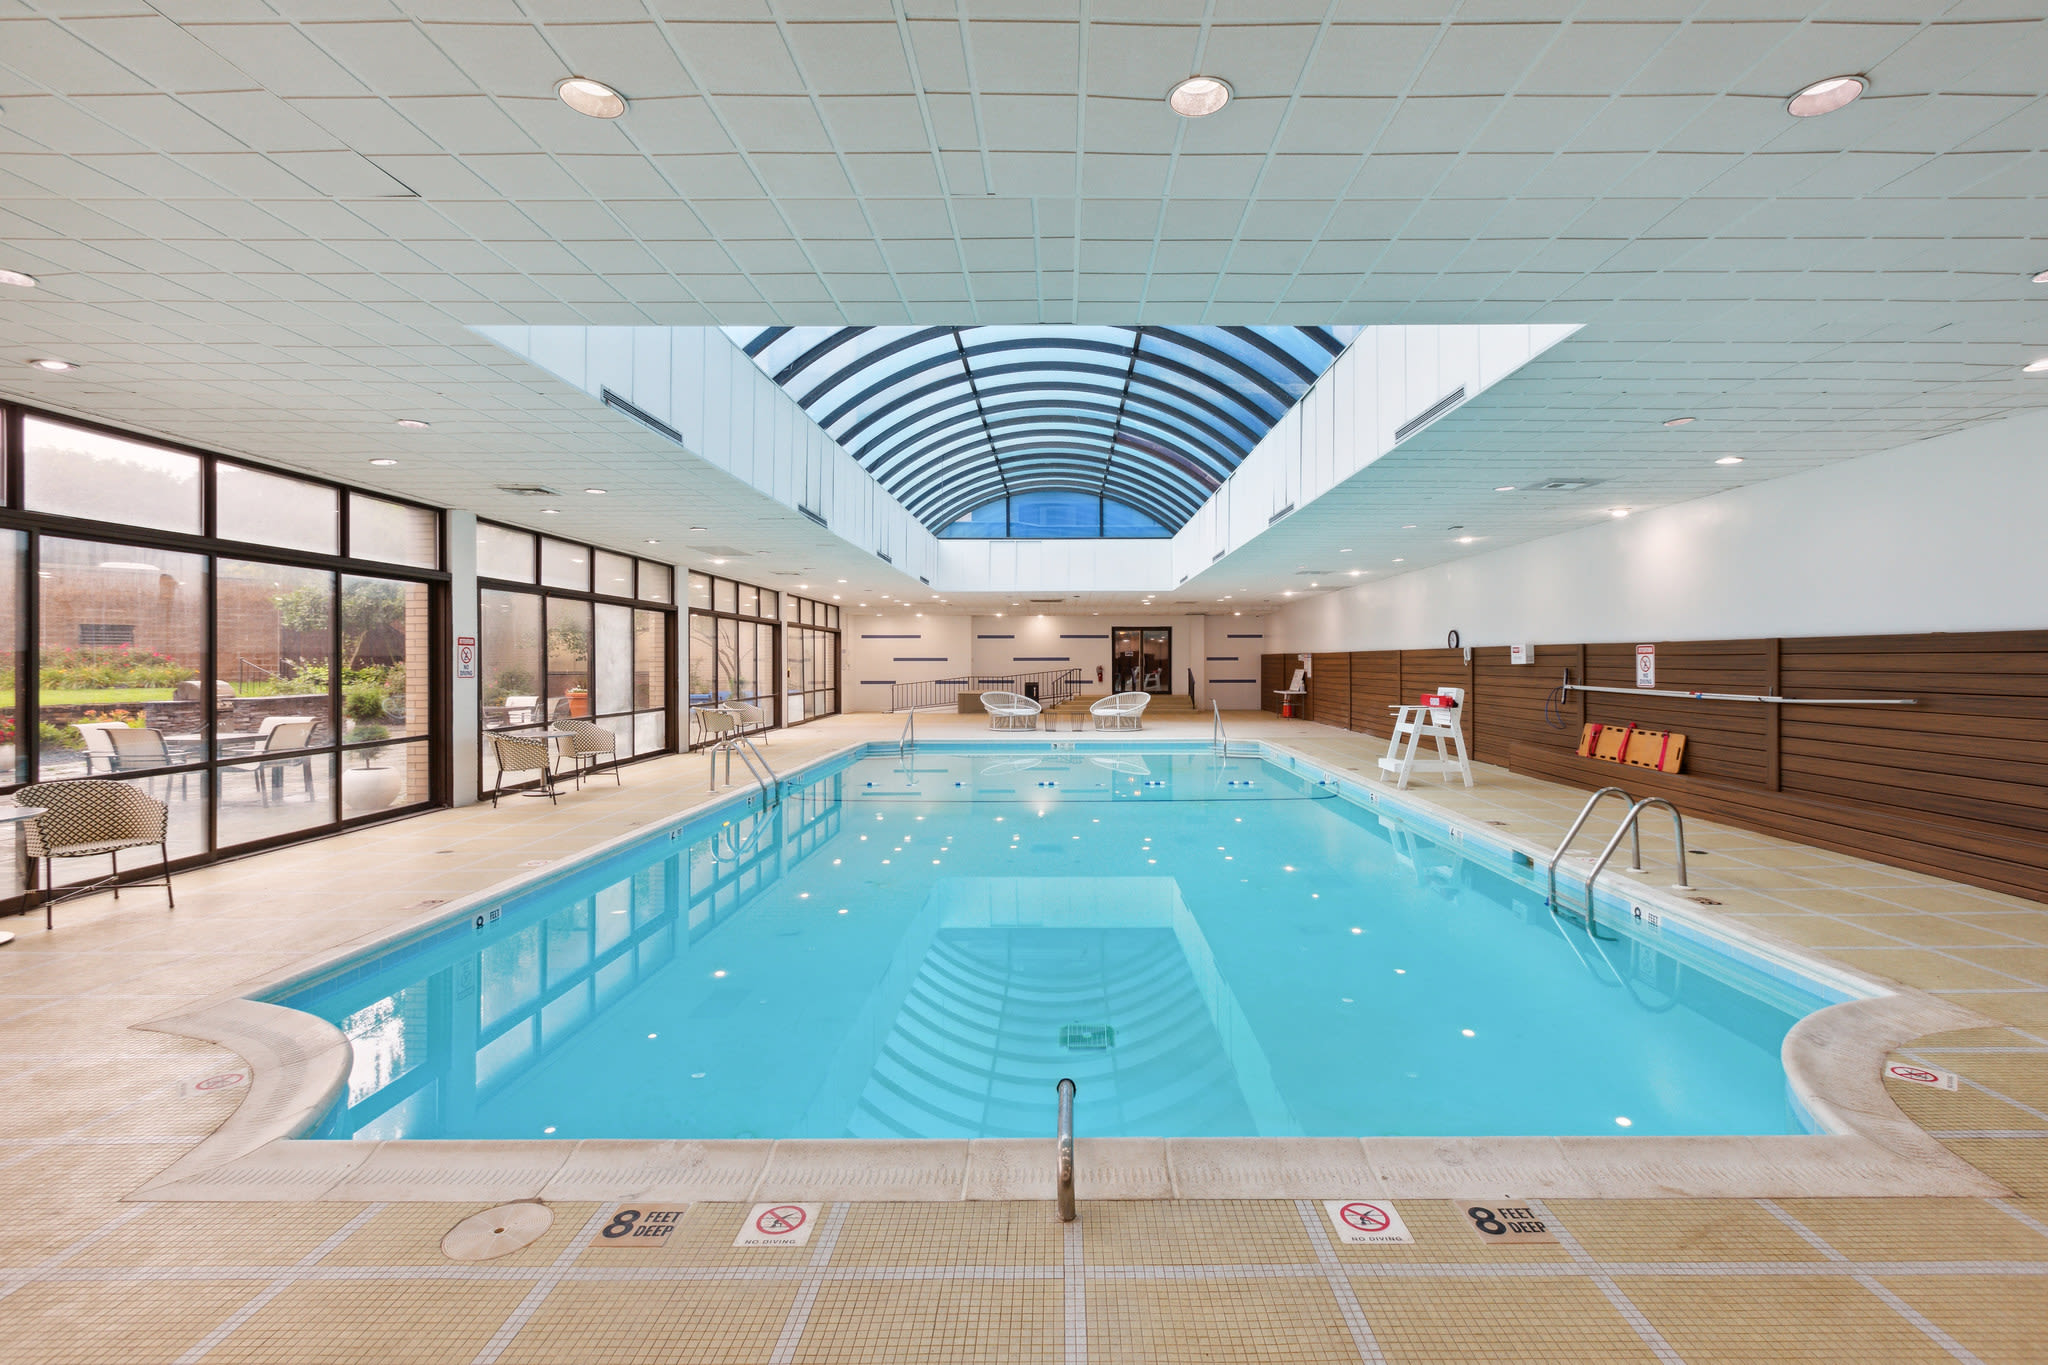 Swimming Pool at The Venue in Rochester, New York.